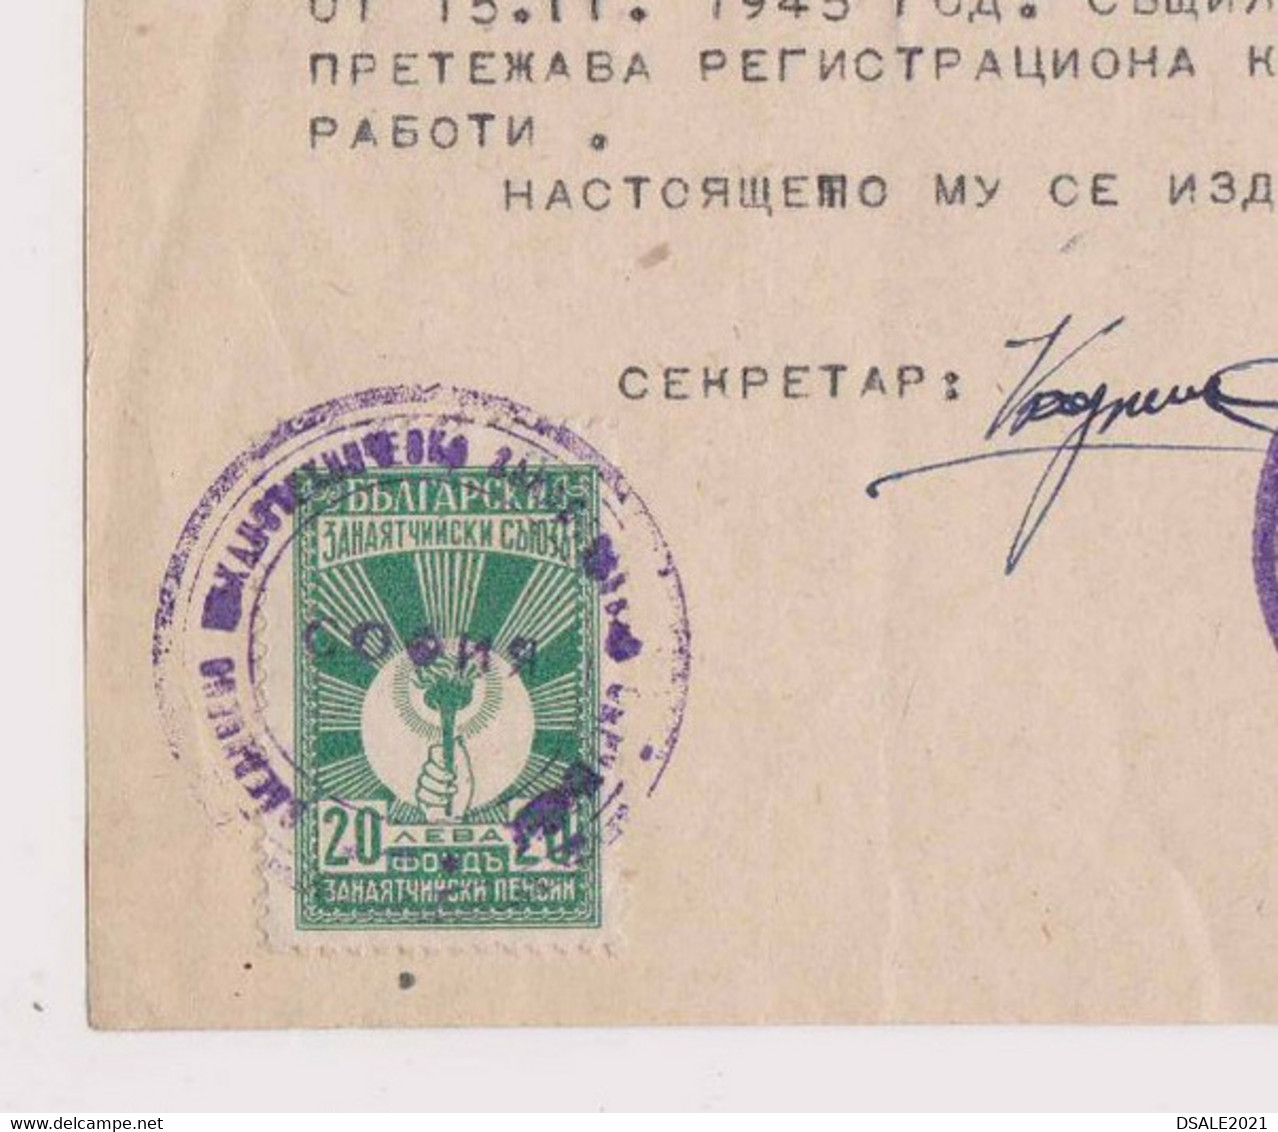 Bulgaria Bulgarie Bulgarije 1945 Certificate For Radio Maker Technician With Rare Fiscla Revenue Stamps Stamp (ds578) - Official Stamps